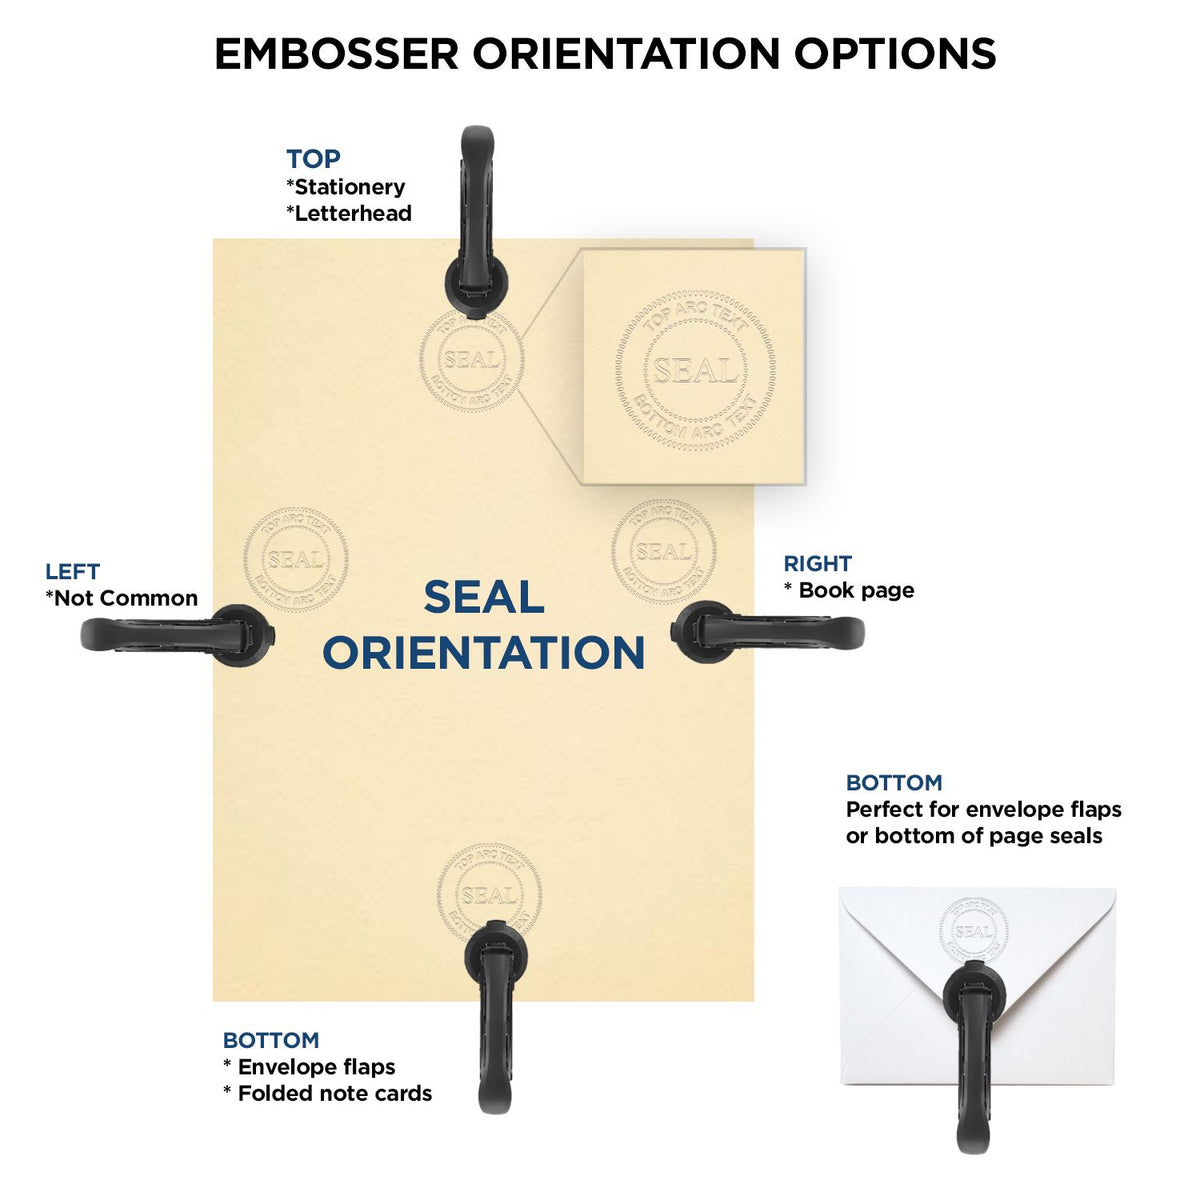 An infographic for the Maryland Geologist Desk Seal showing embosser orientation, this is showing examples of a top, bottom, right and left insert.